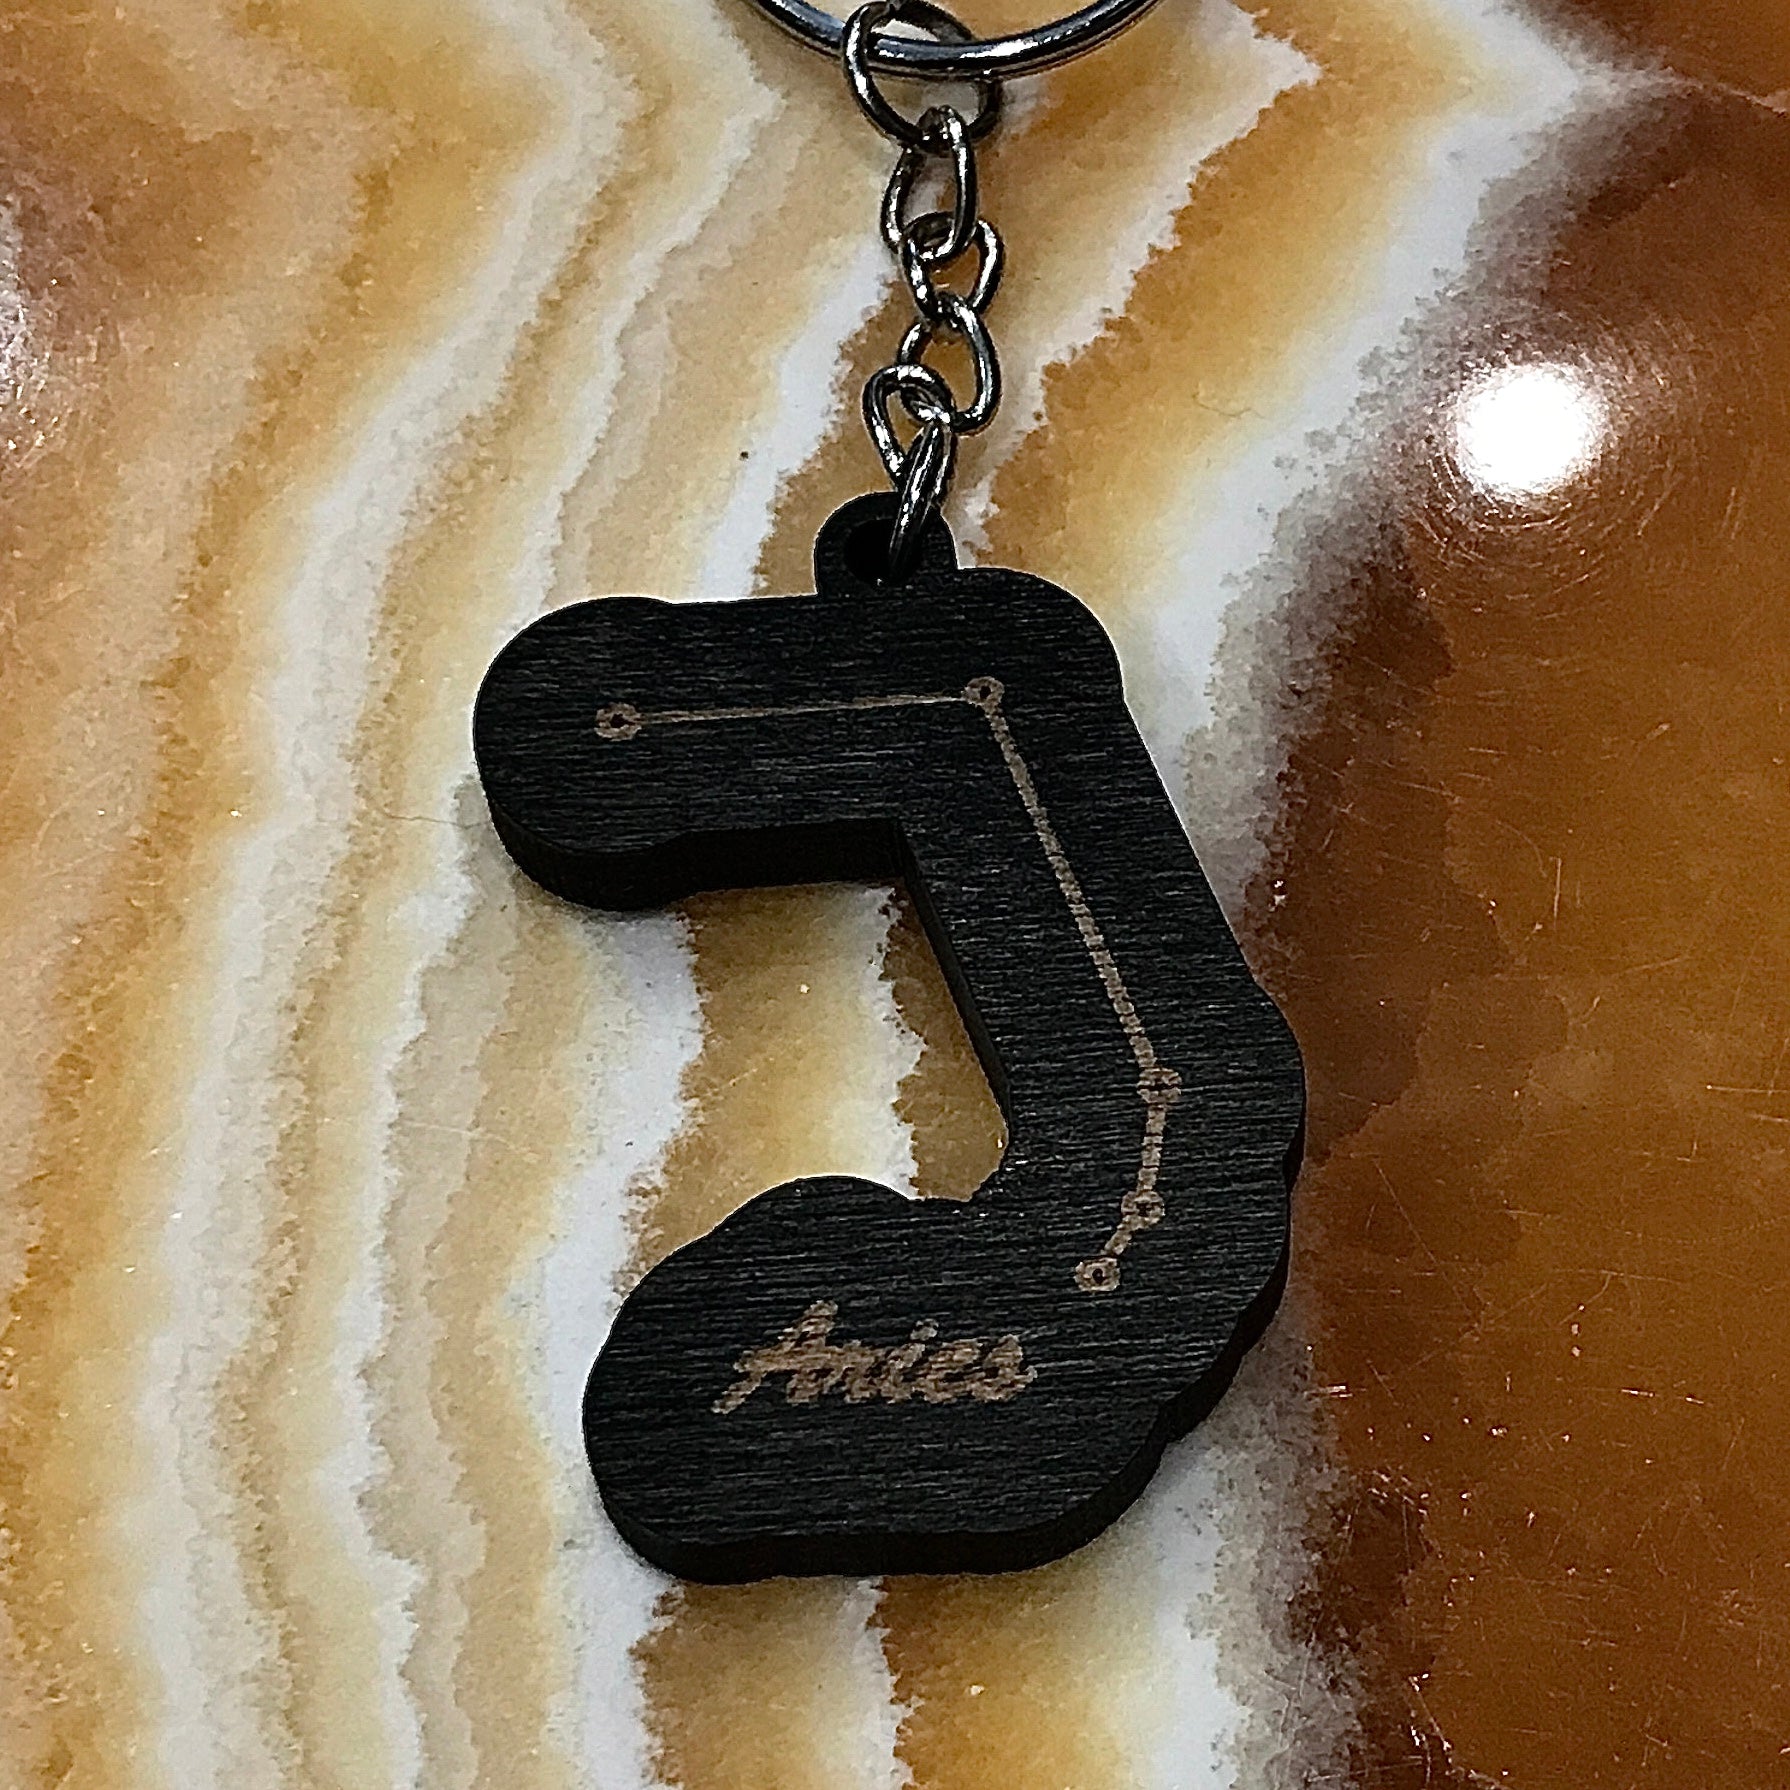 Aries Zodiac Keychain by Down to Earth Co.